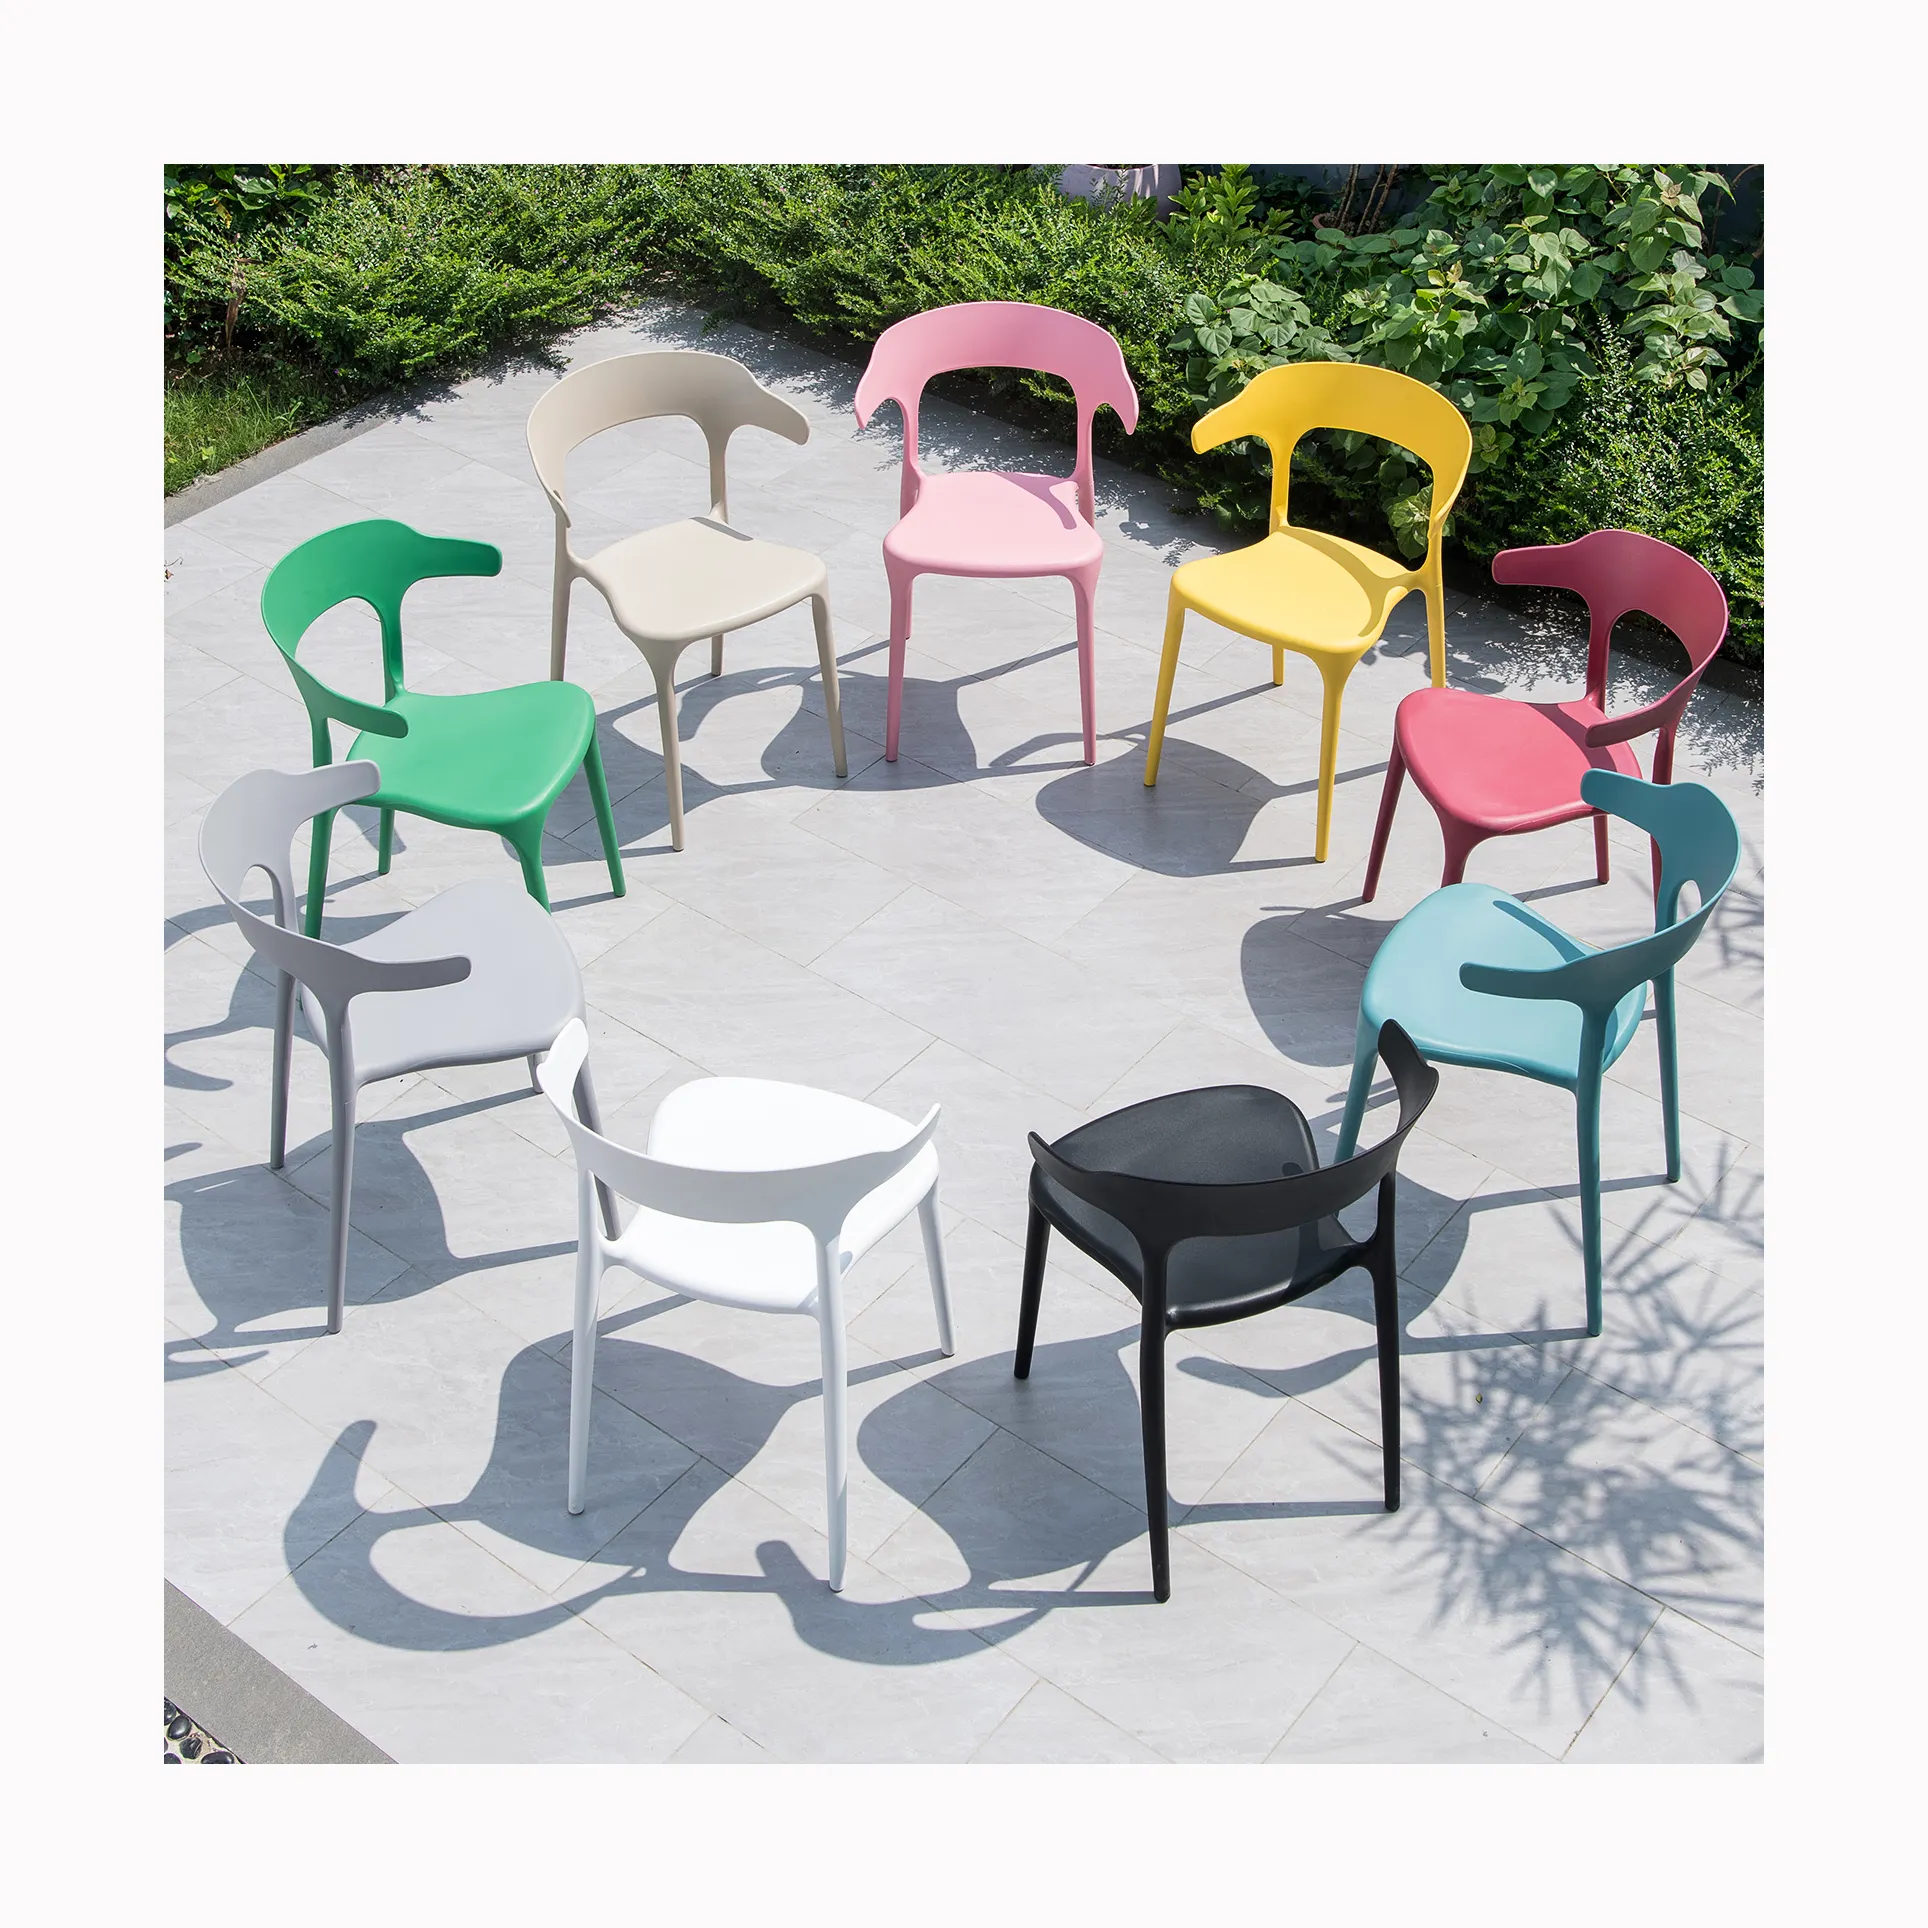 High quality plastic chairs tables Outdoor Furniture garden resin chair Cheap Stackable Colorful plastic dining pp Chairs